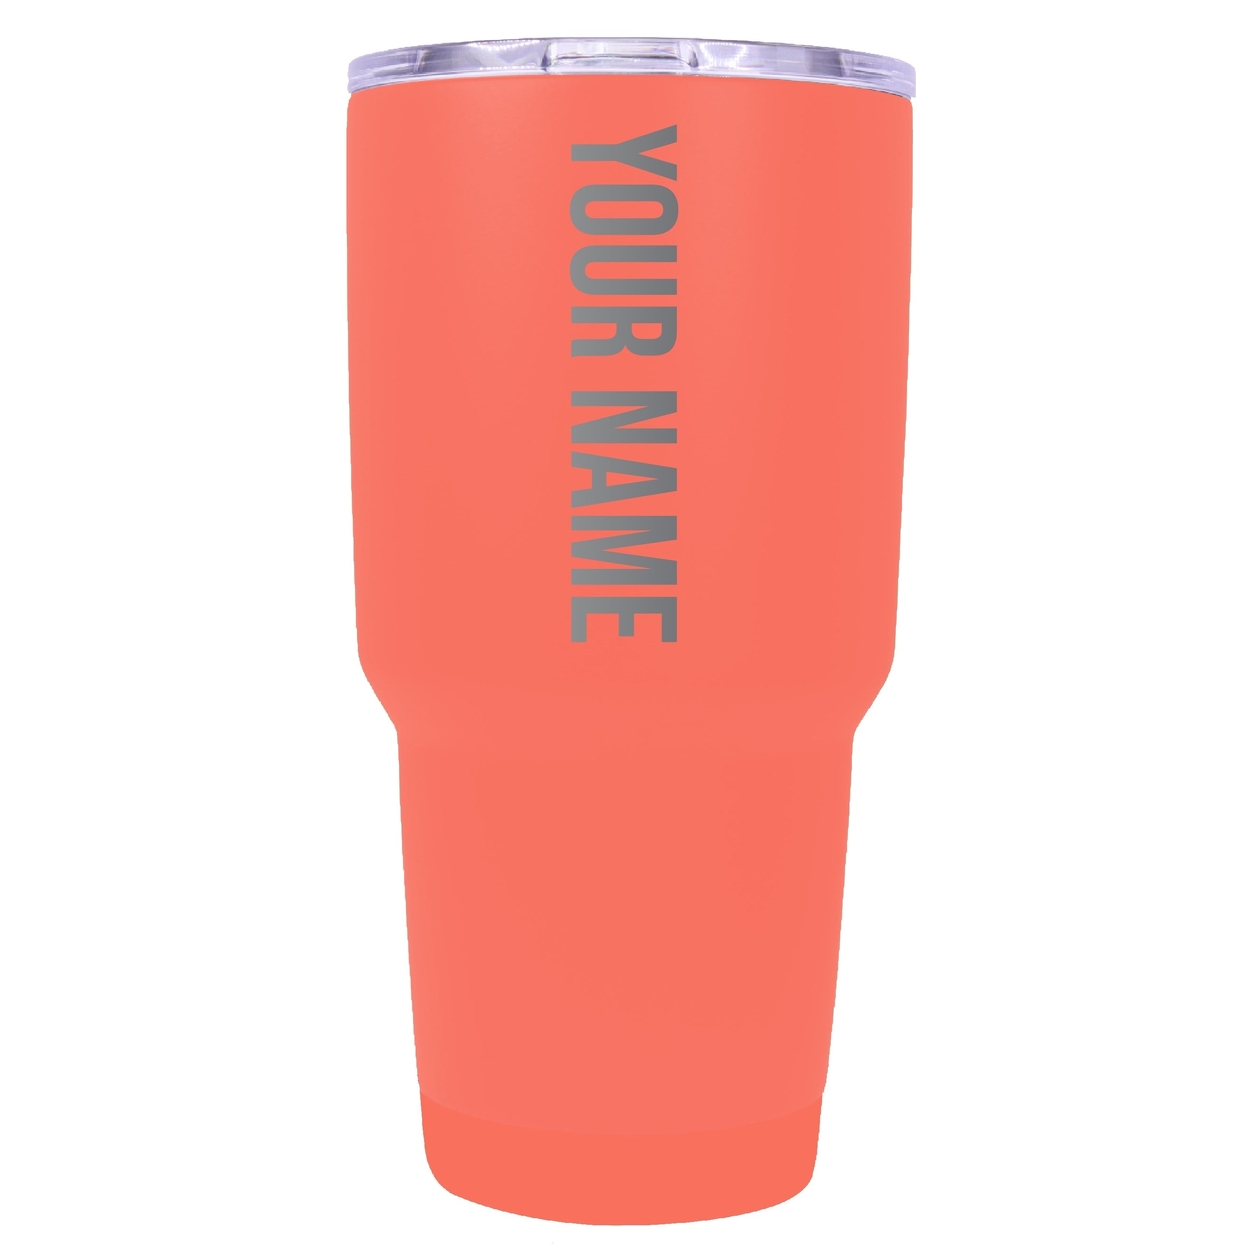 Customizable Laser Etched 24 Oz Insulated Stainless Steel Tumbler Personalized With Custom Name Or Message - Coral, Single